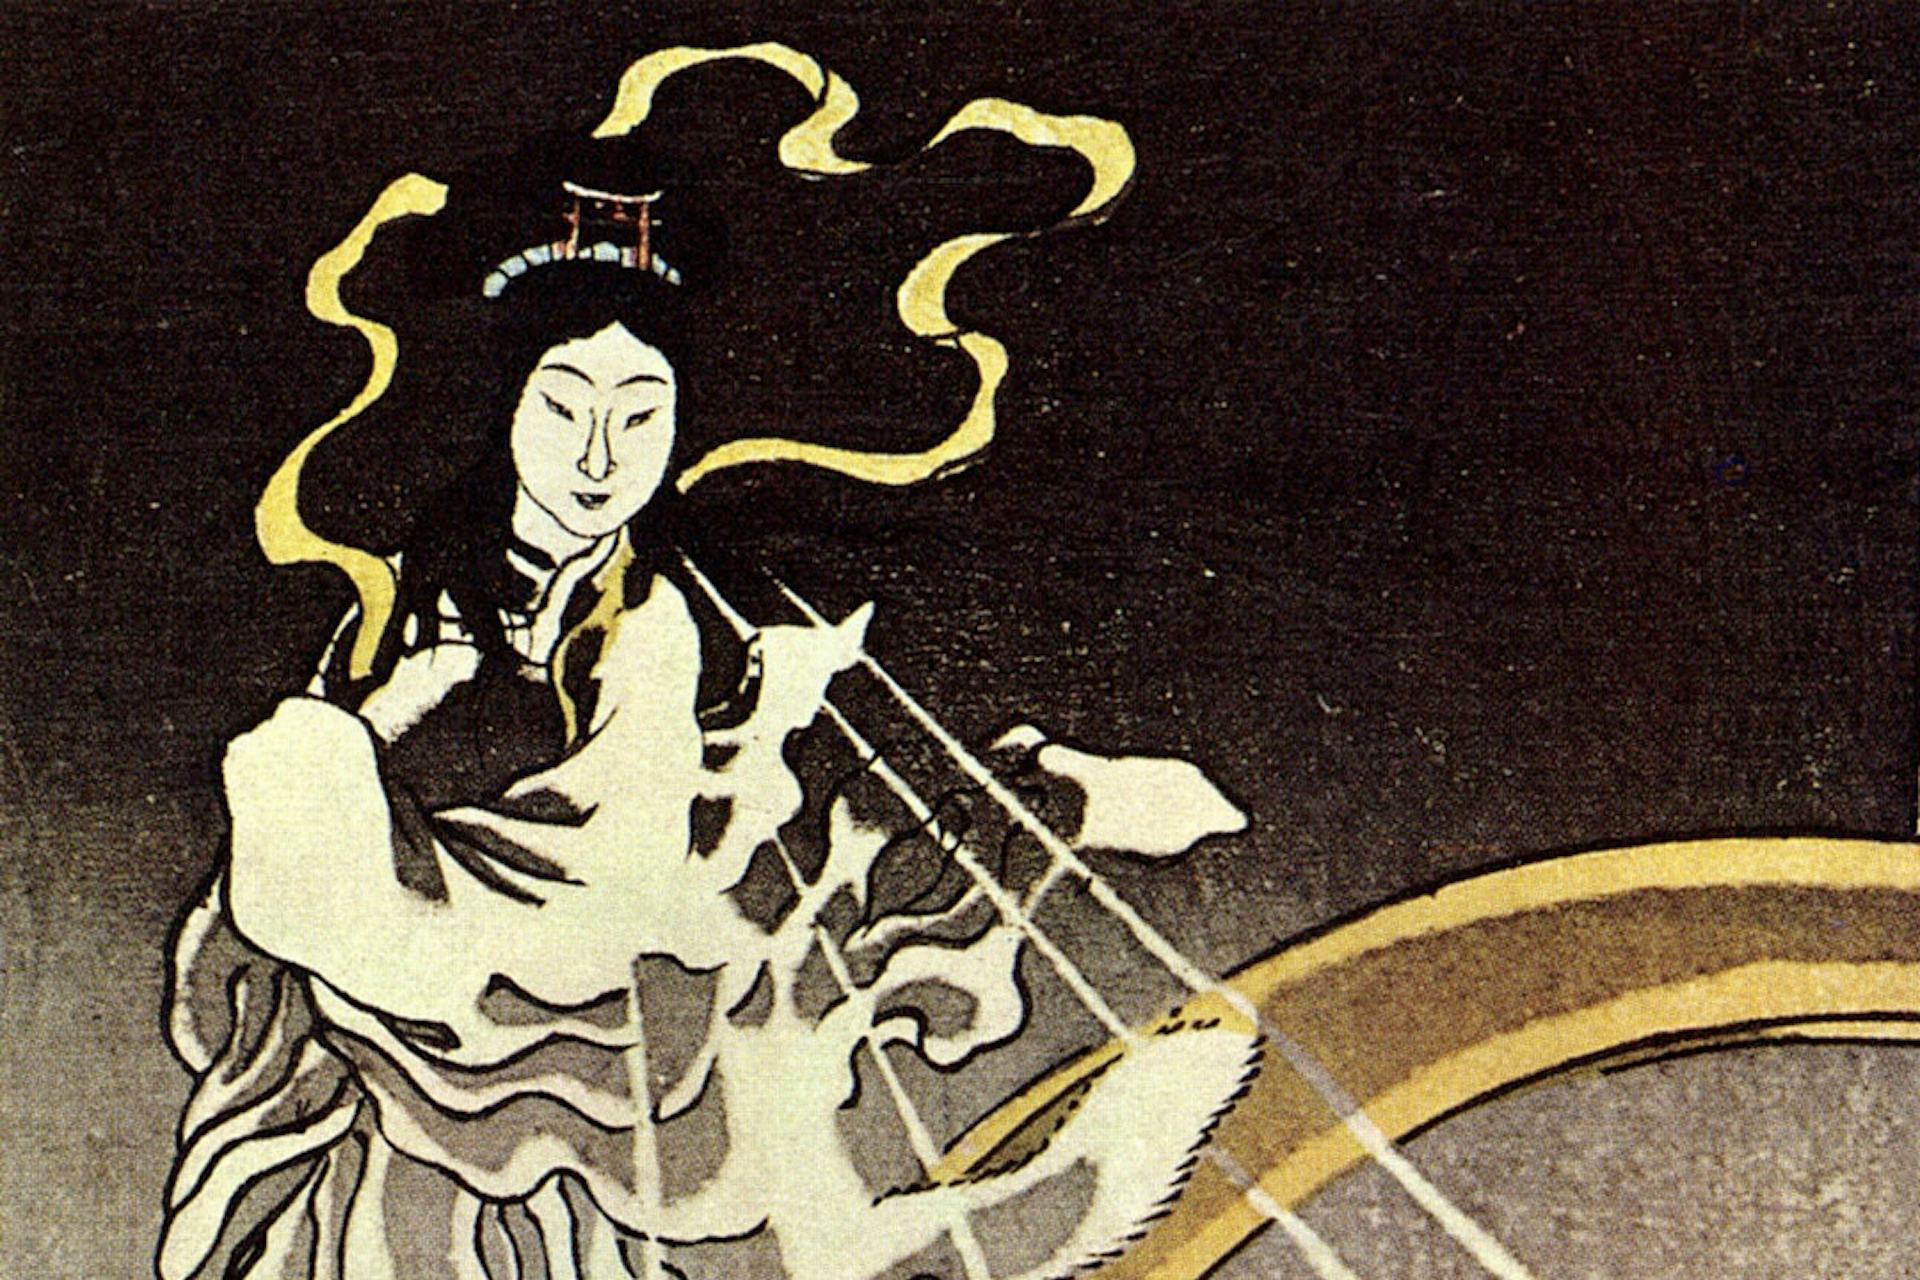 In this illustration, Inari appears to be looking down from heaven as a woman. A white robe covers Inari, who is wearing her black hair half up and half down.